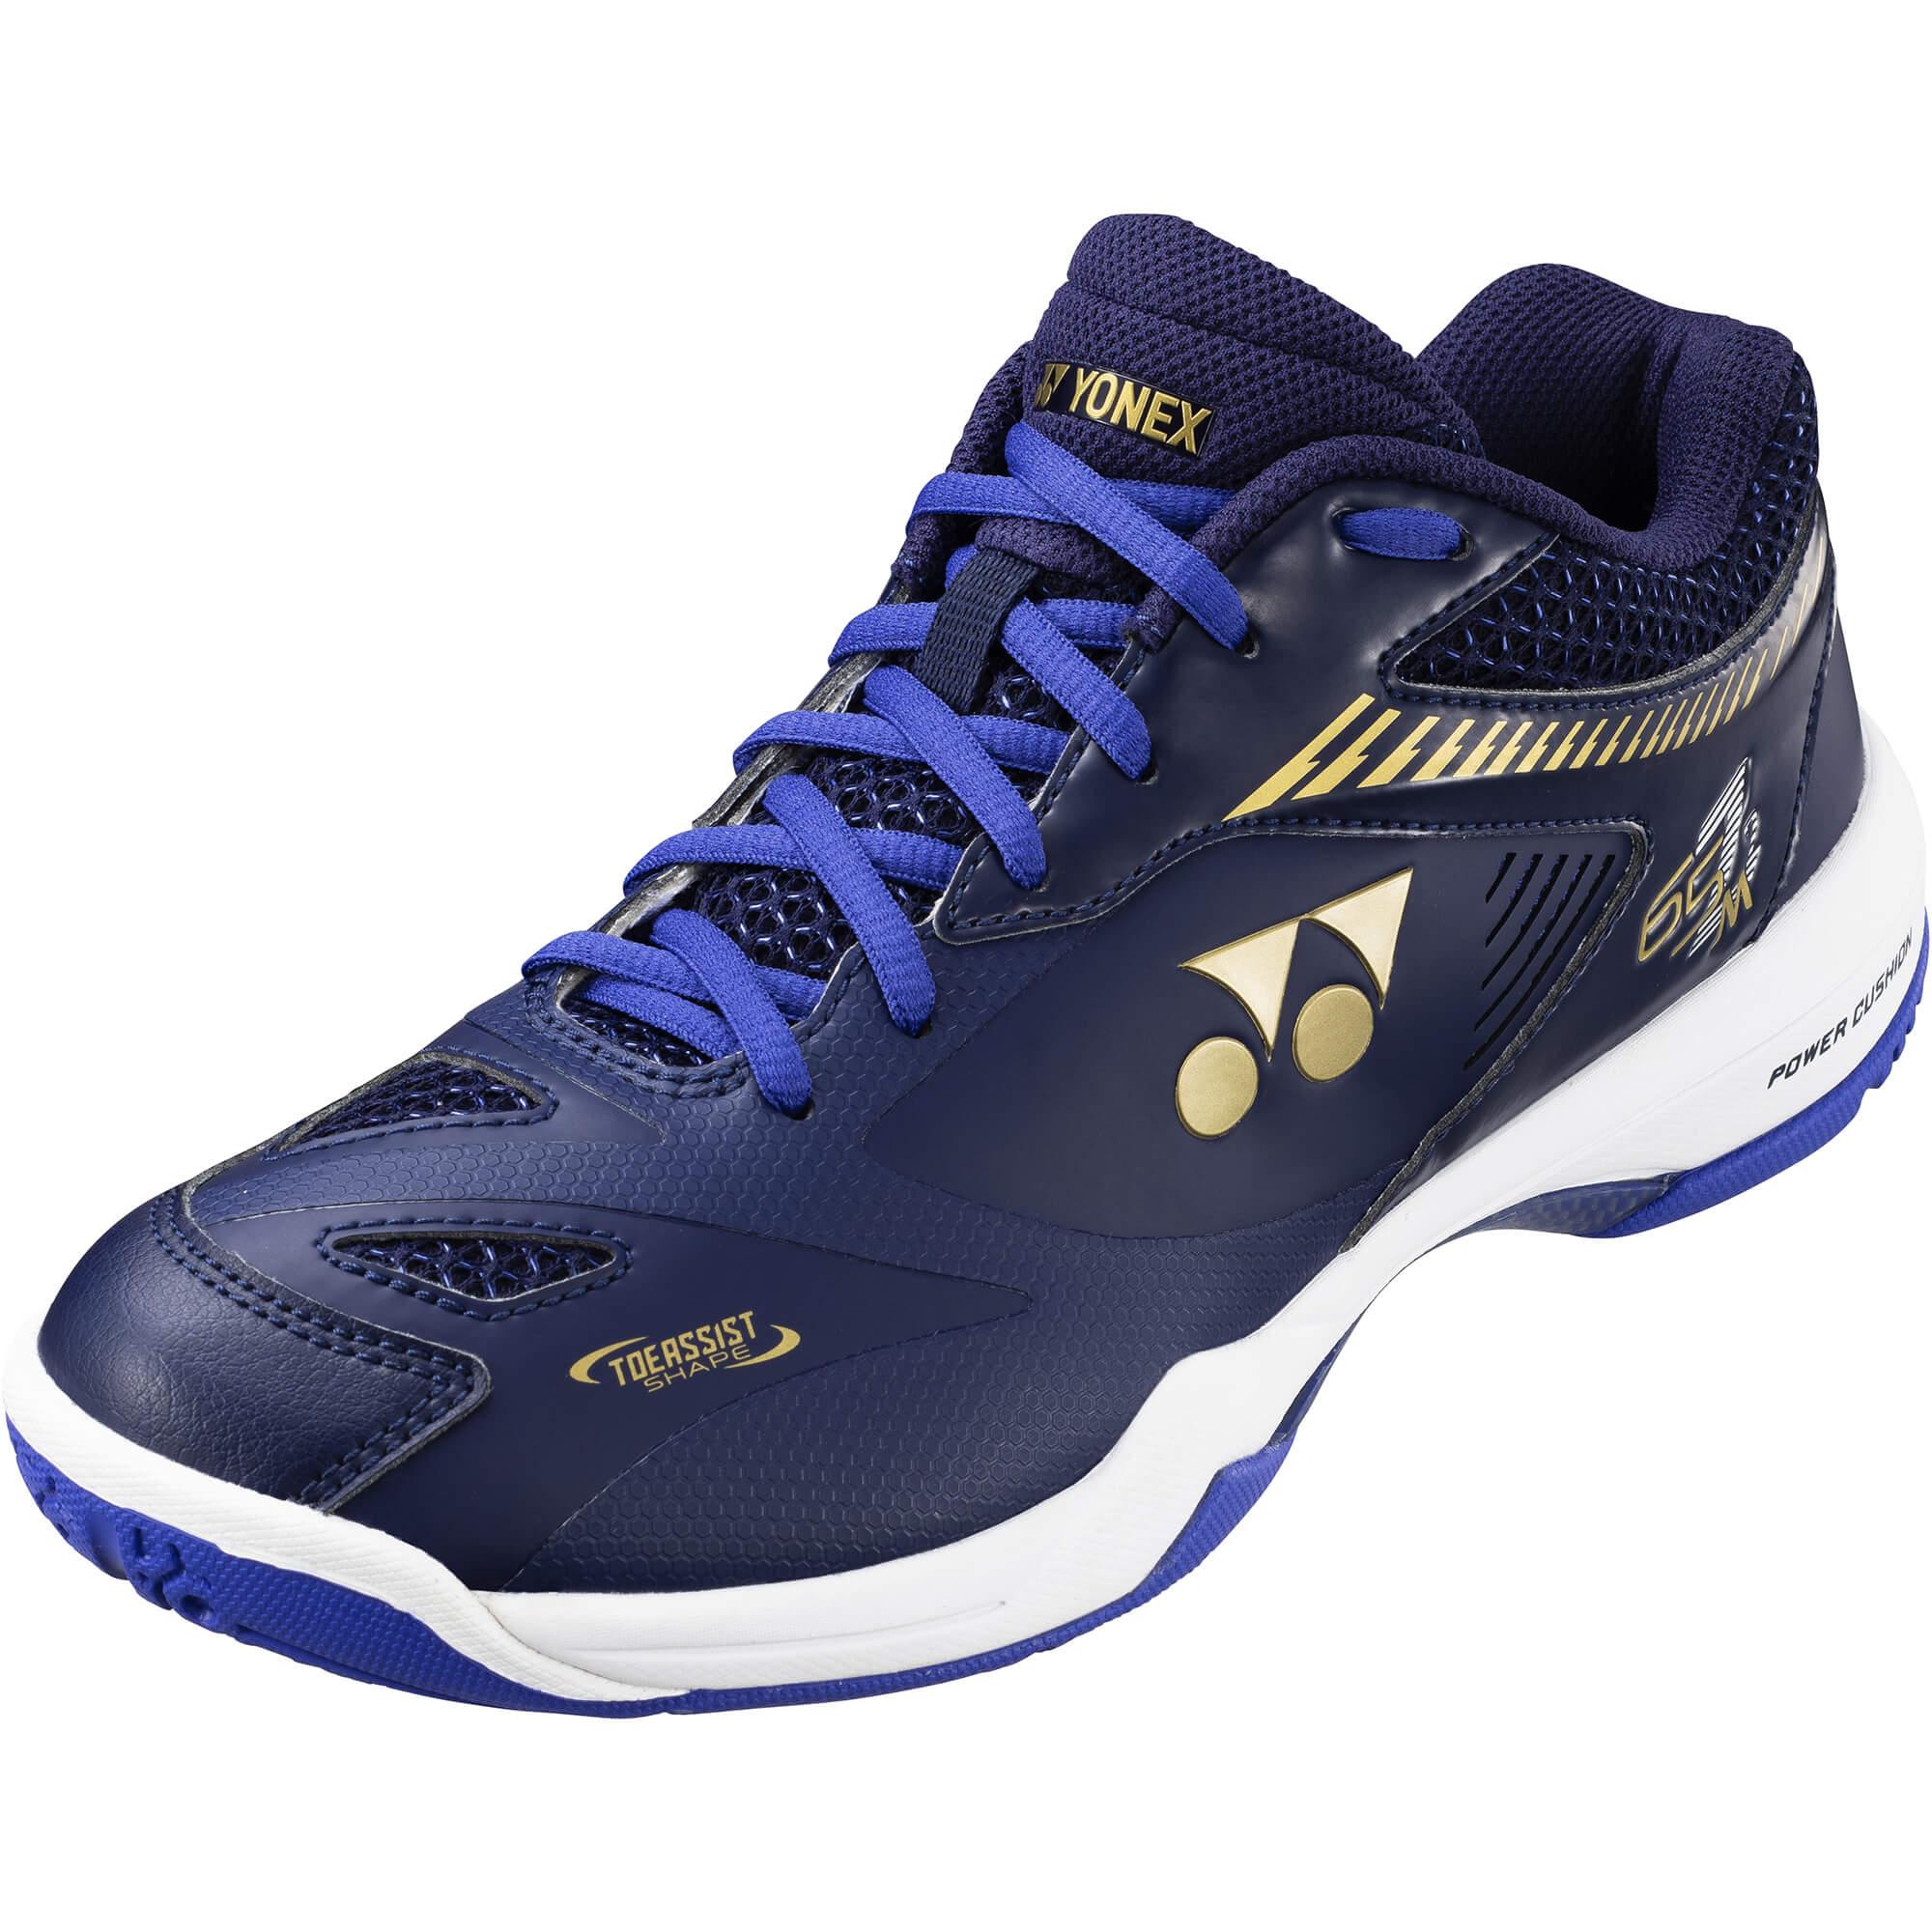 YONEX Power Cushion 65 Z2 Kento Momota 2020 Limited Edition Mens Indoor Court Shoes Sapphire Navy 